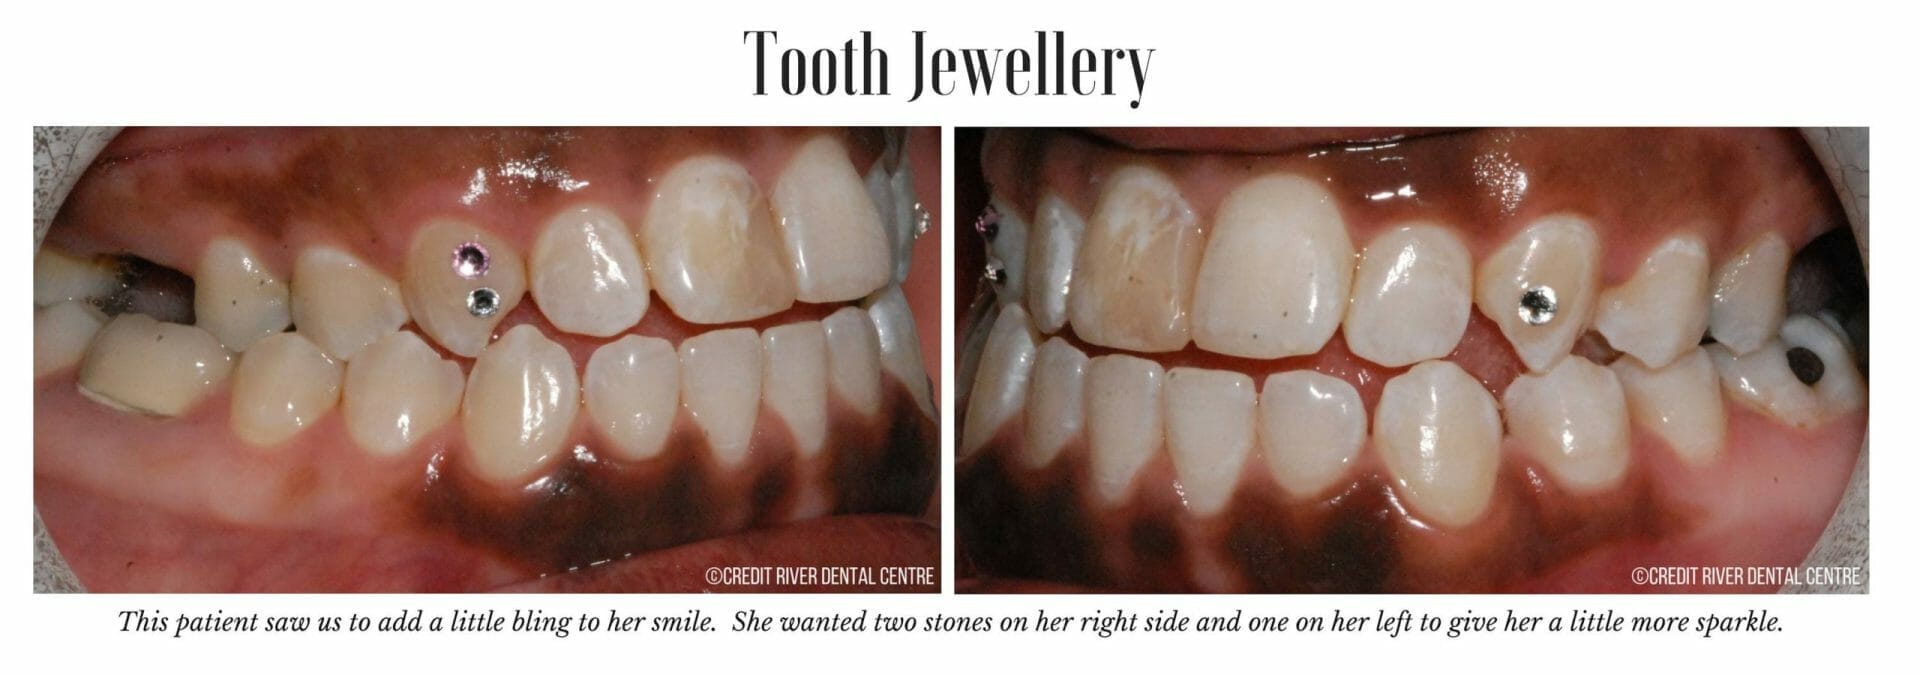 Dental tooth gems, sparkles and gold tooth jewelry? So much choice we have!